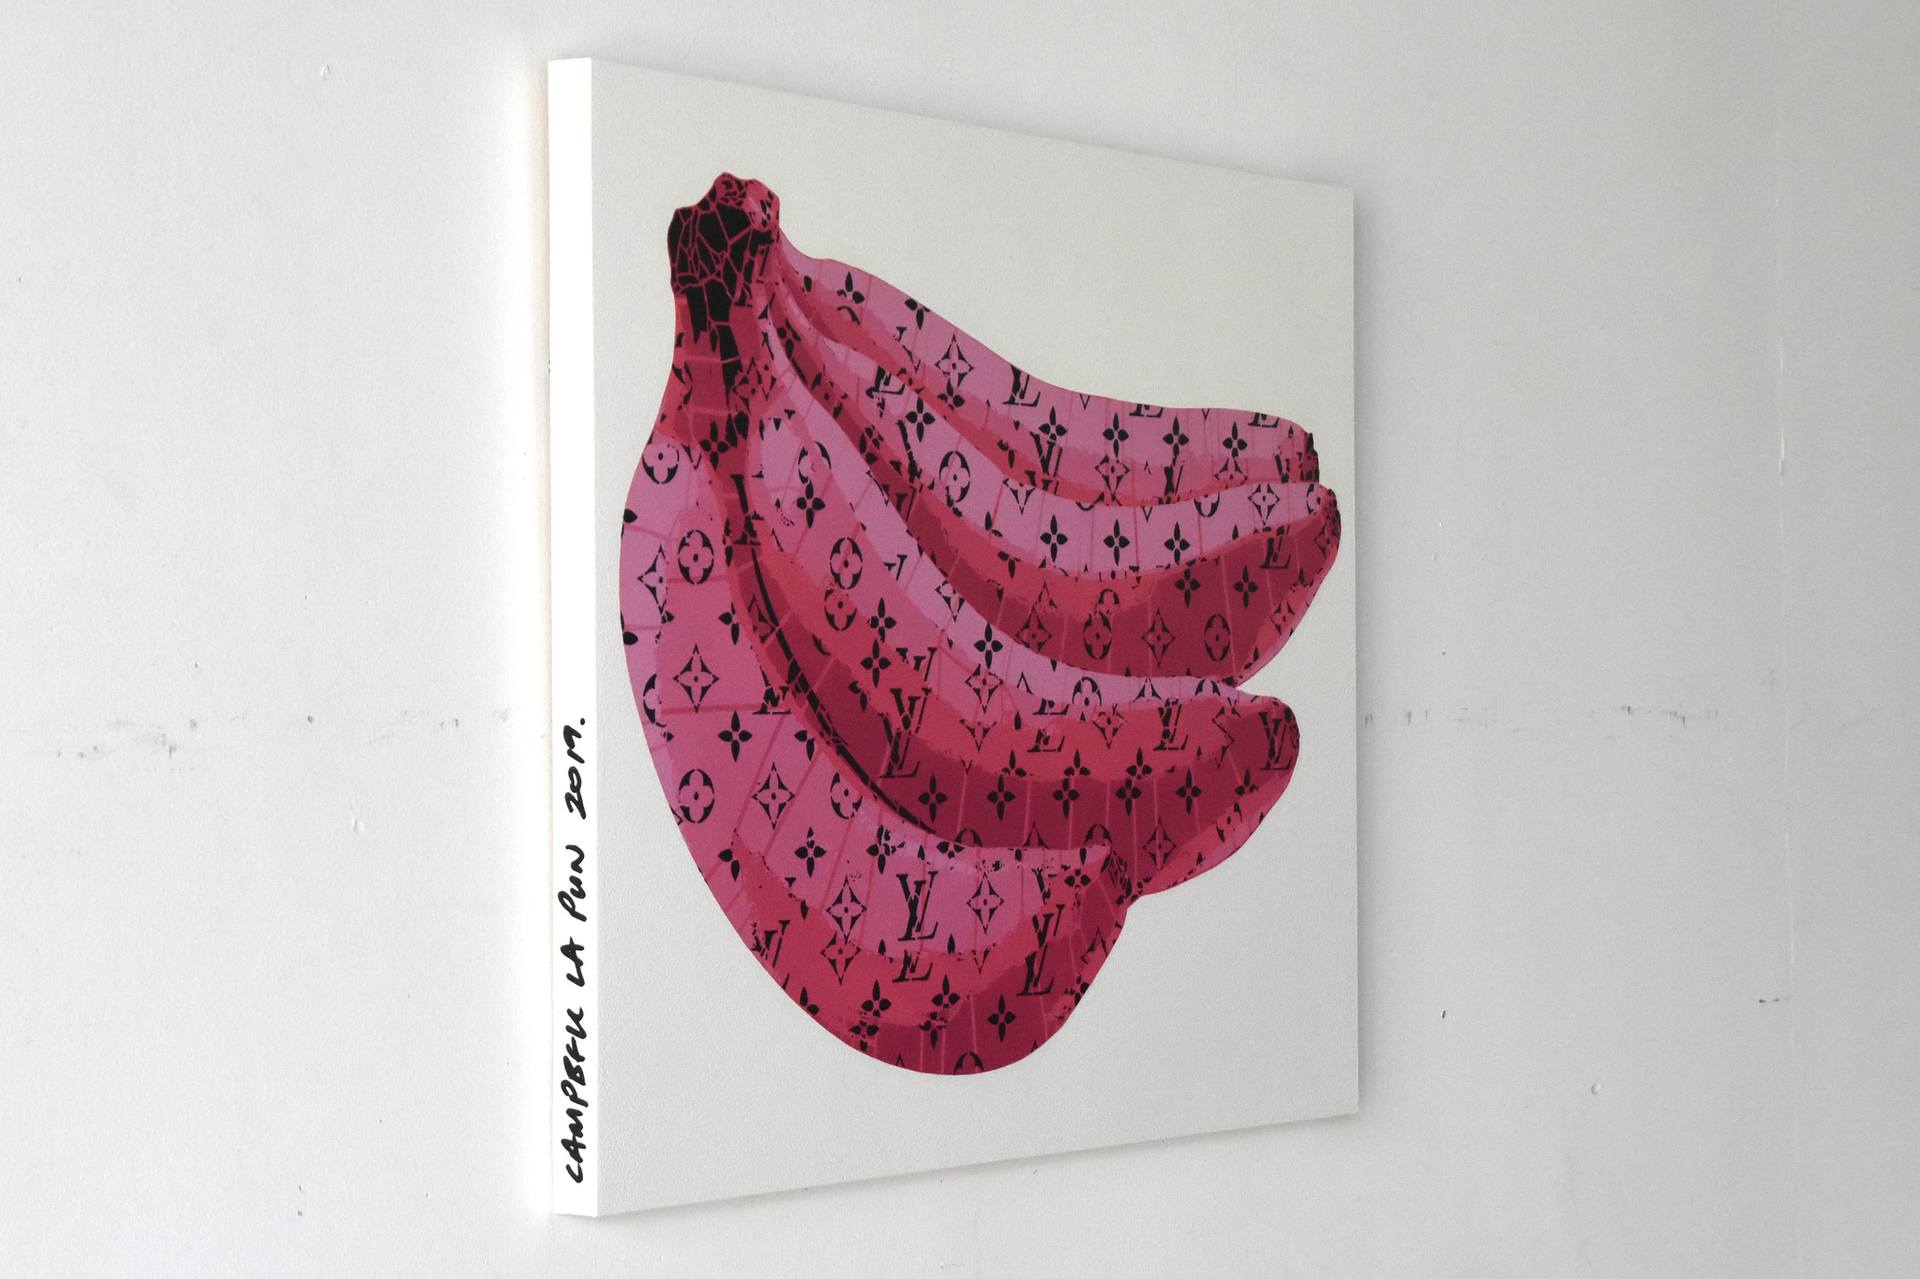 LV Banana Pink - Tokyo Edition (Ed. 5 of 15) Painting by Campbell